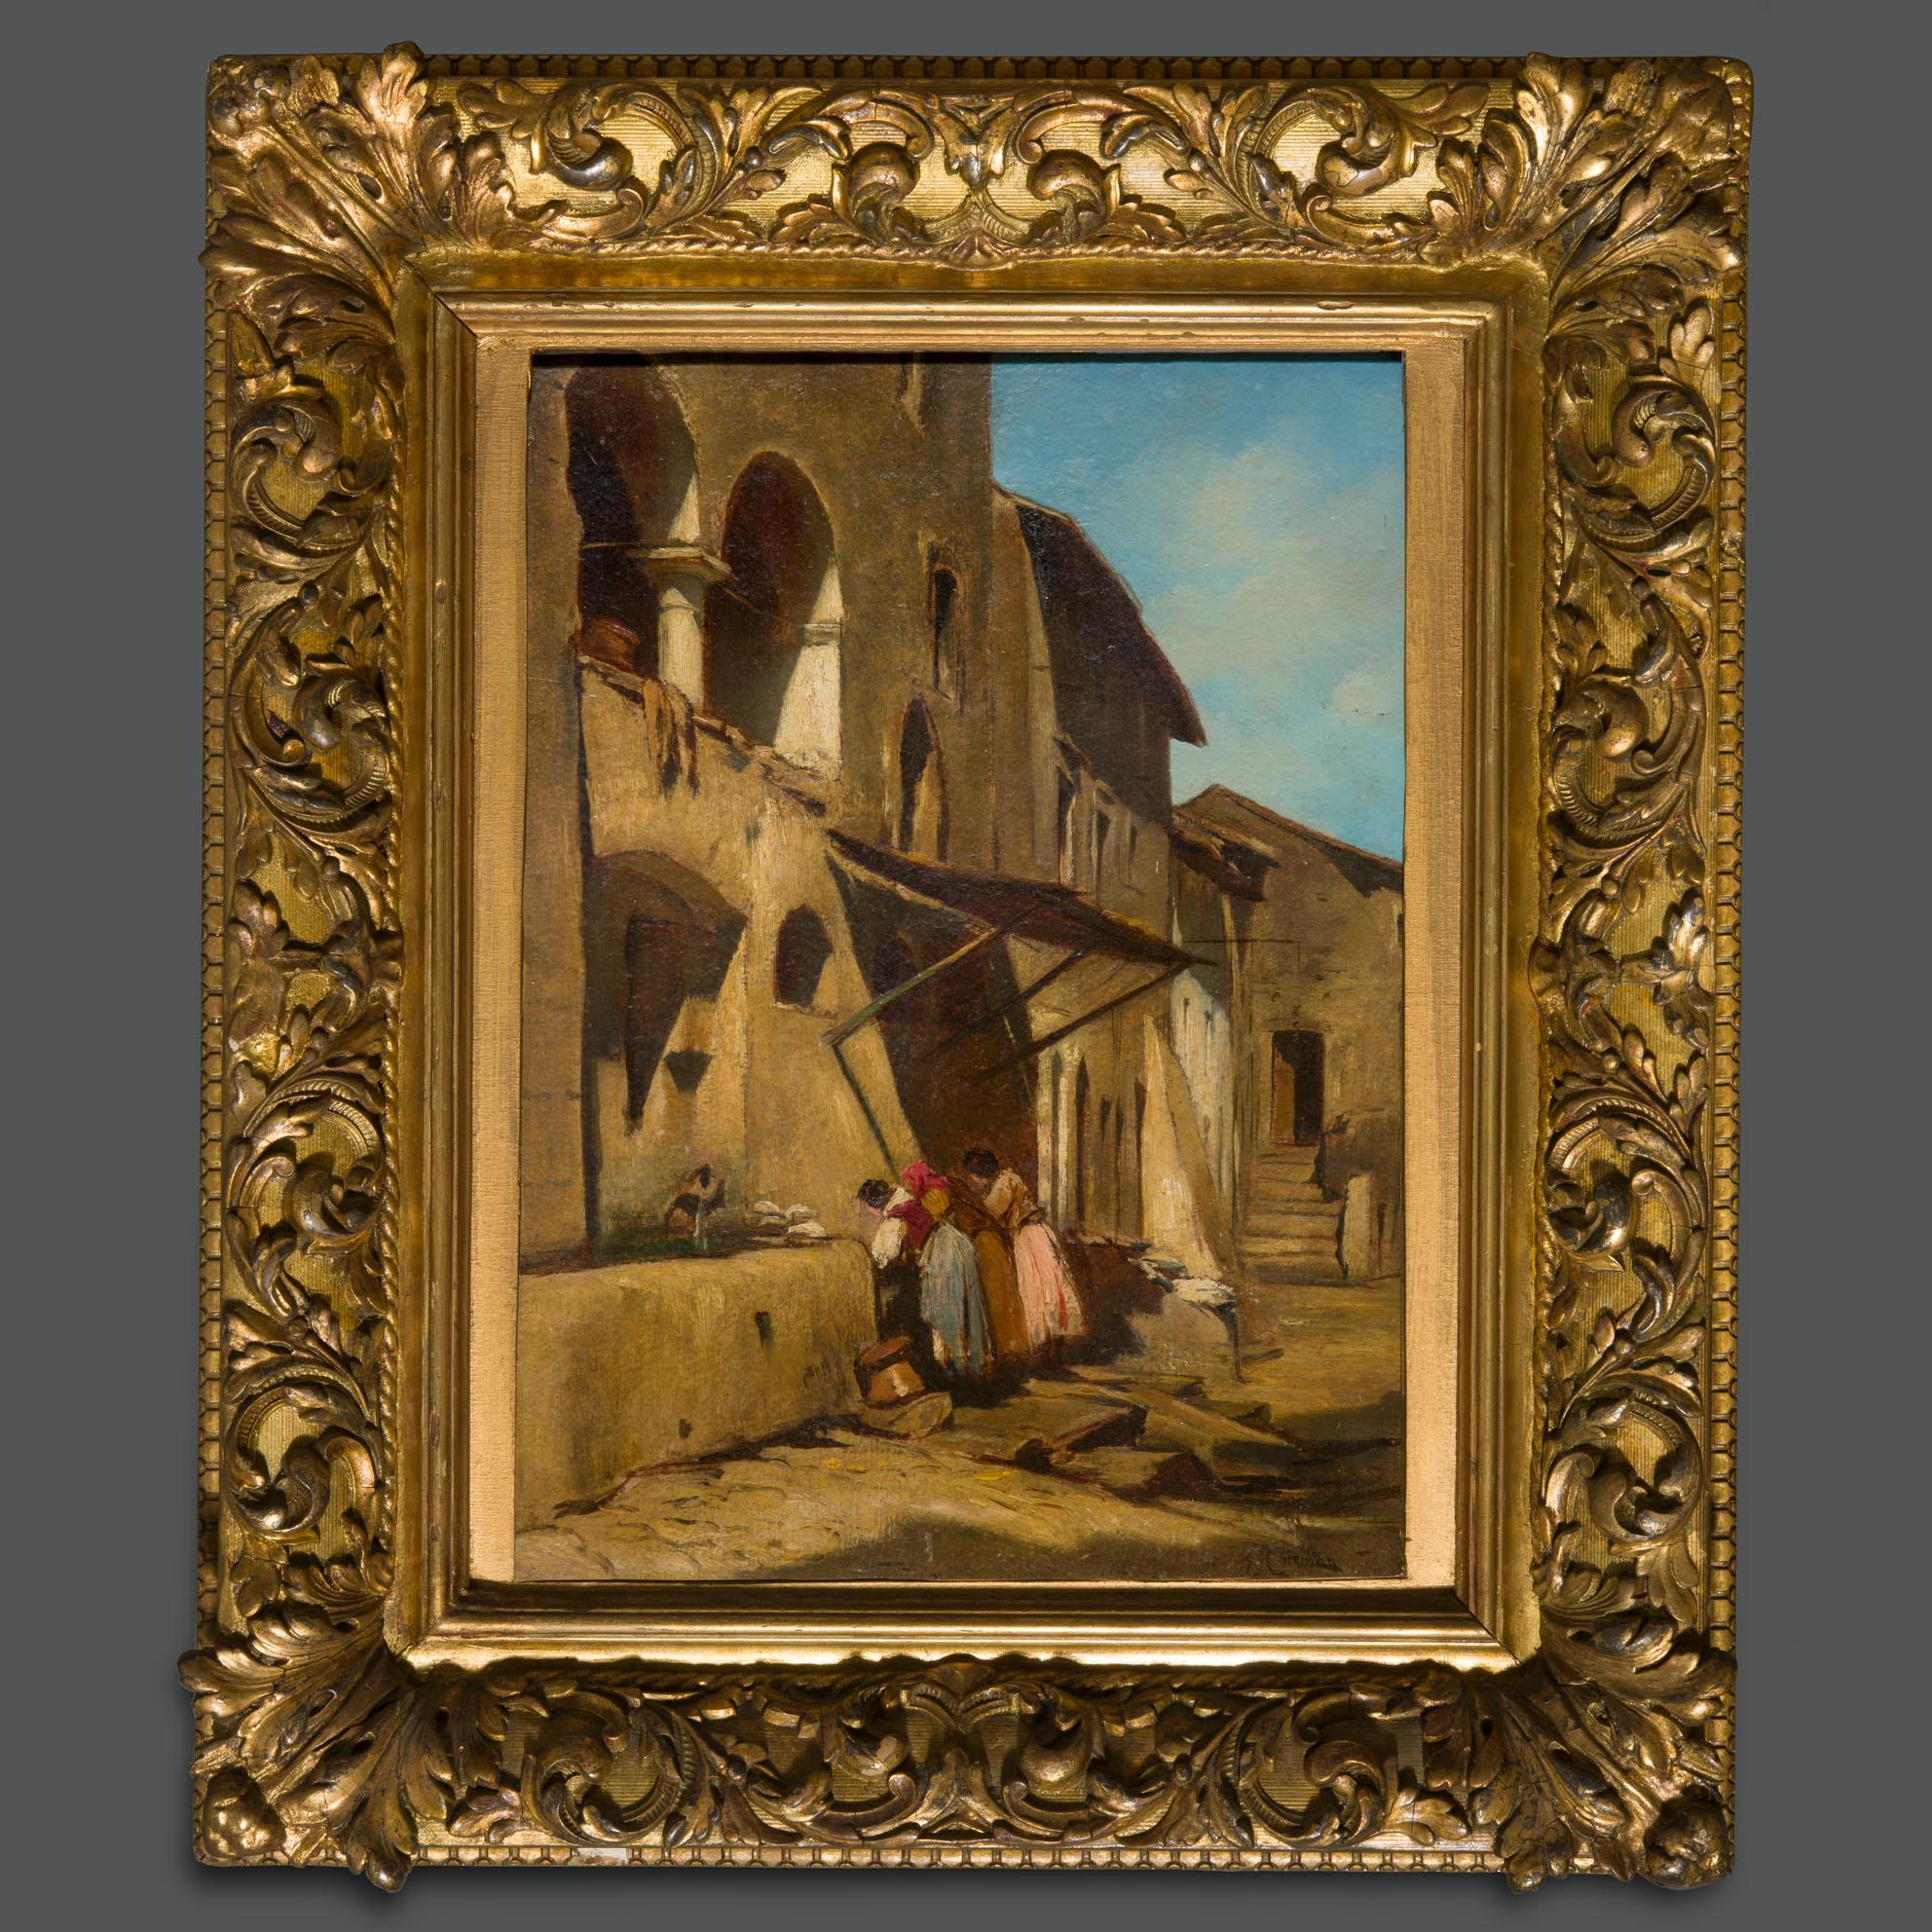 An important painting by one of the most representative Italian artists of the 19th century, Enrico Coleman.
It depicts a village most probably from Lazio, perhaps a glimpse of Anticoli Corrado, the town famous for the attractiveness of its models,